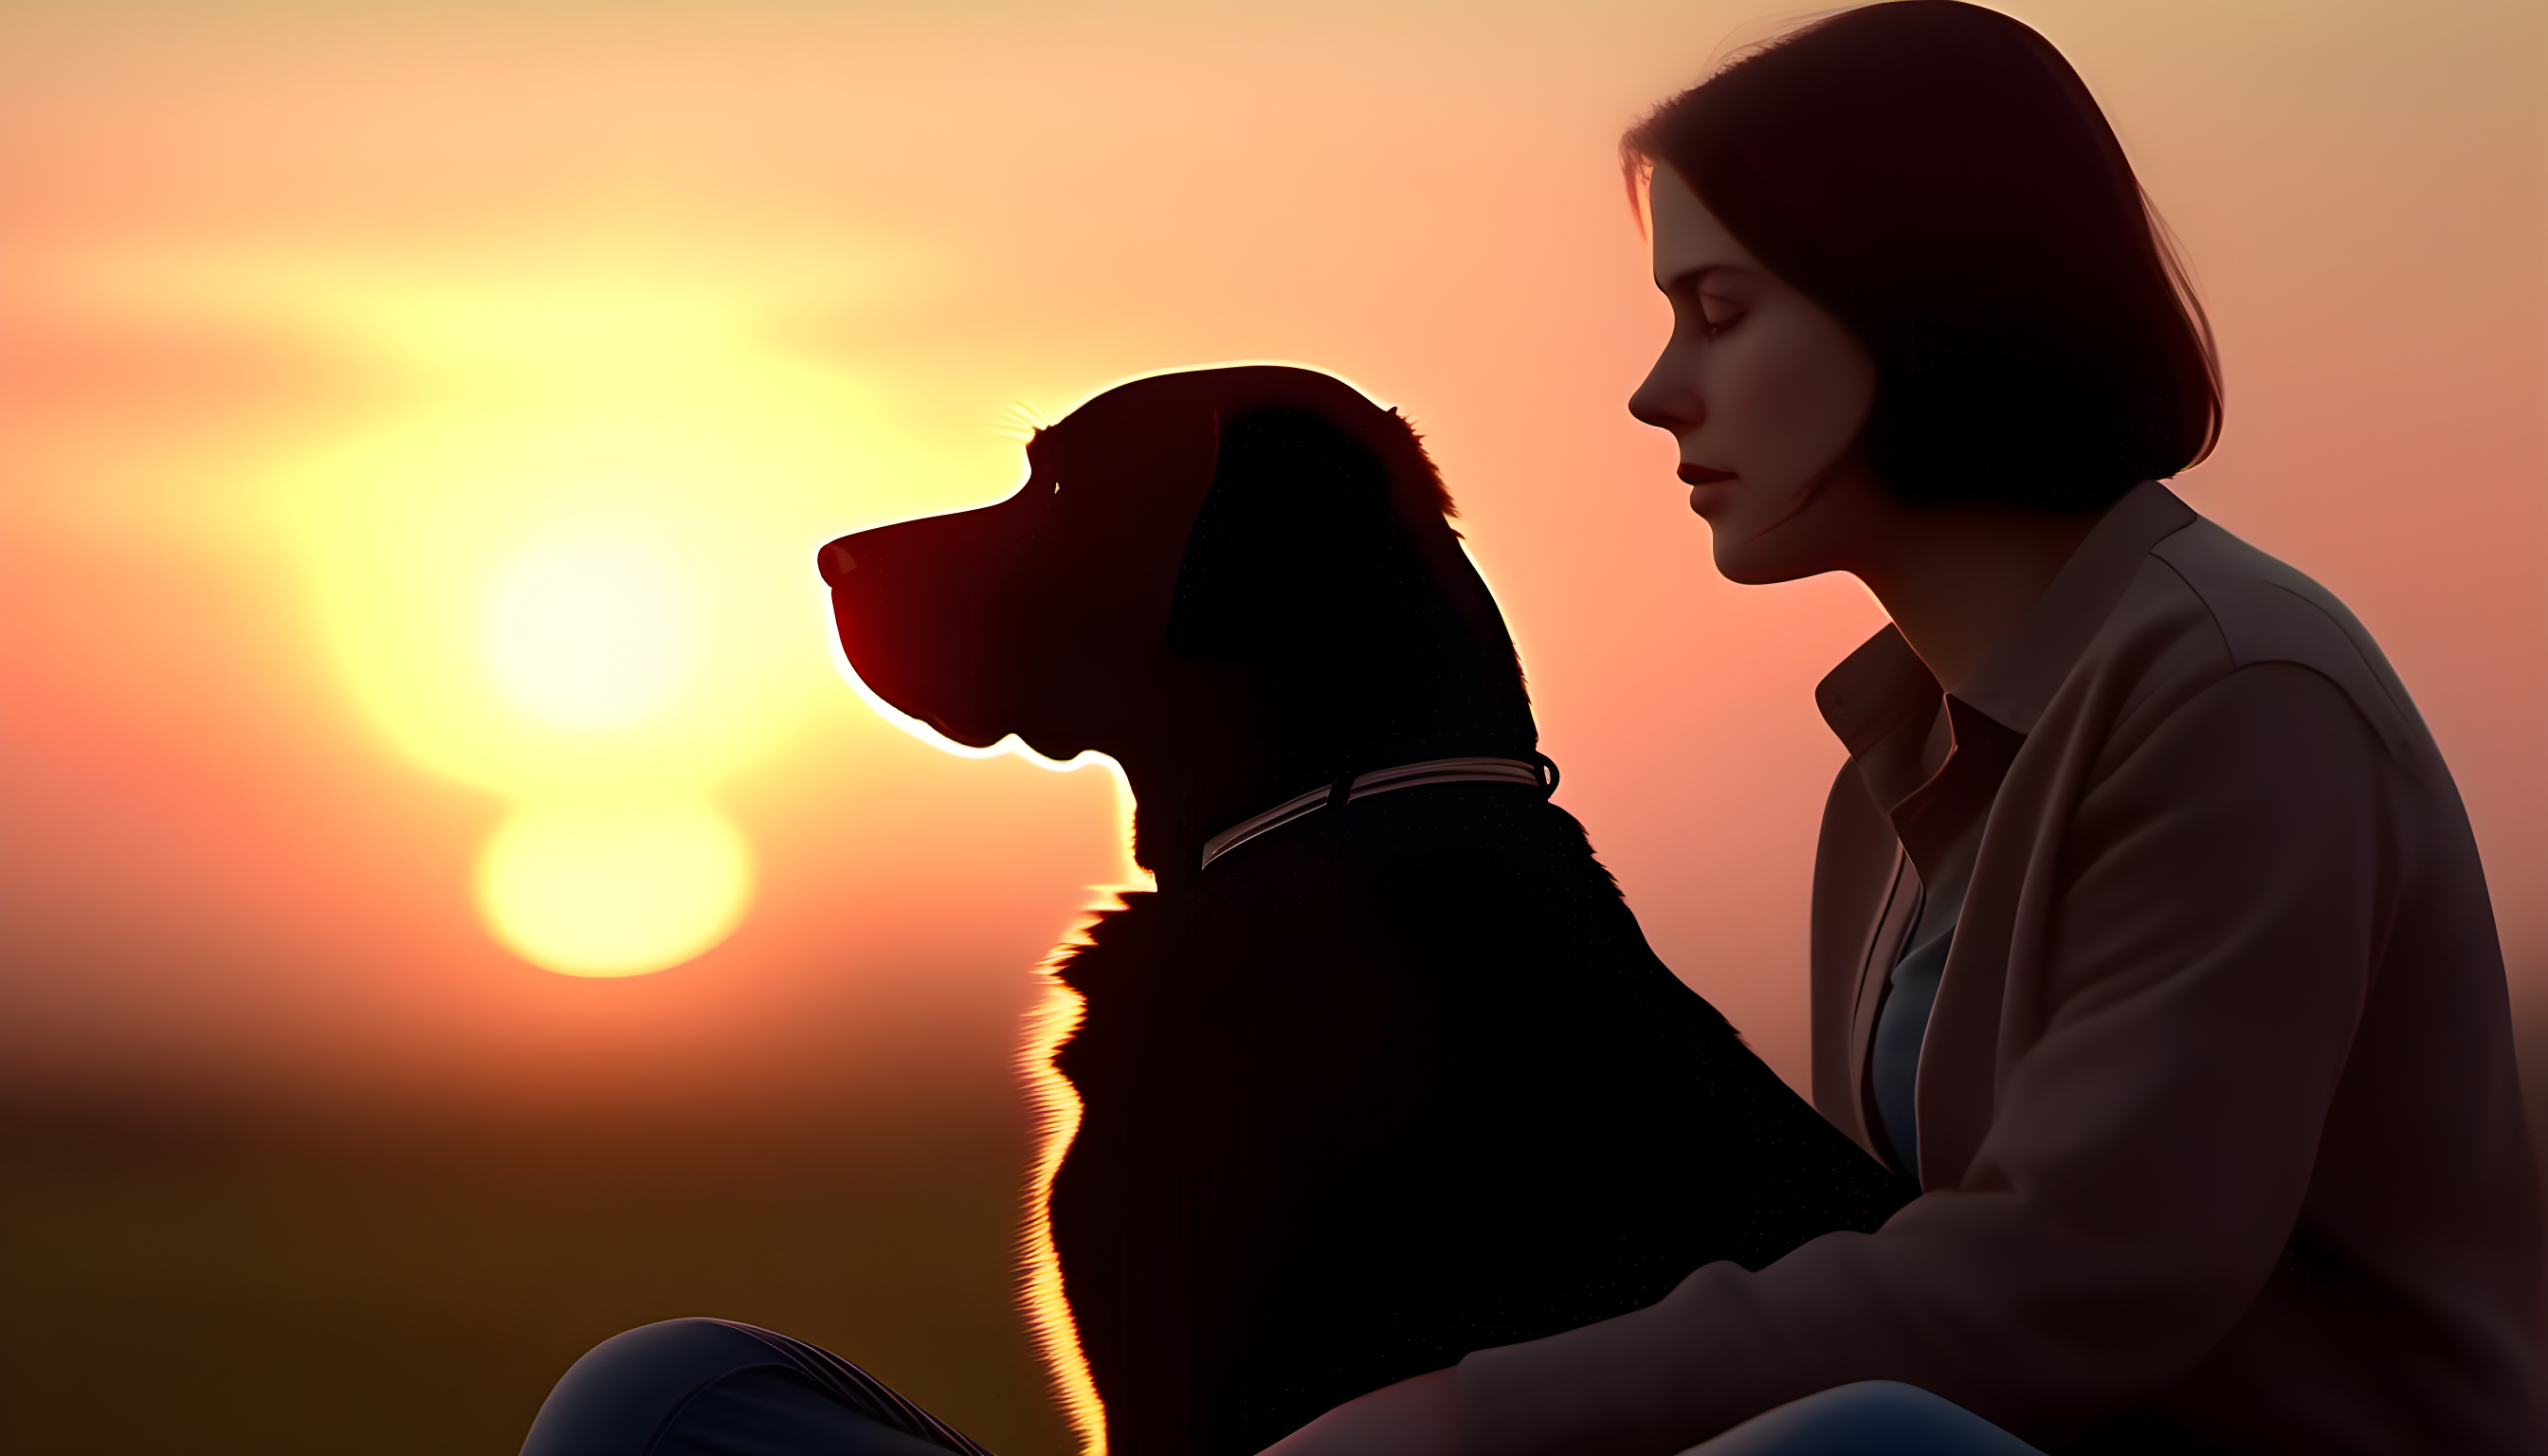 A chocolate lab and its human, sharing a serene moment while watching the sunset, capturing the essence of a deep, emotional bond